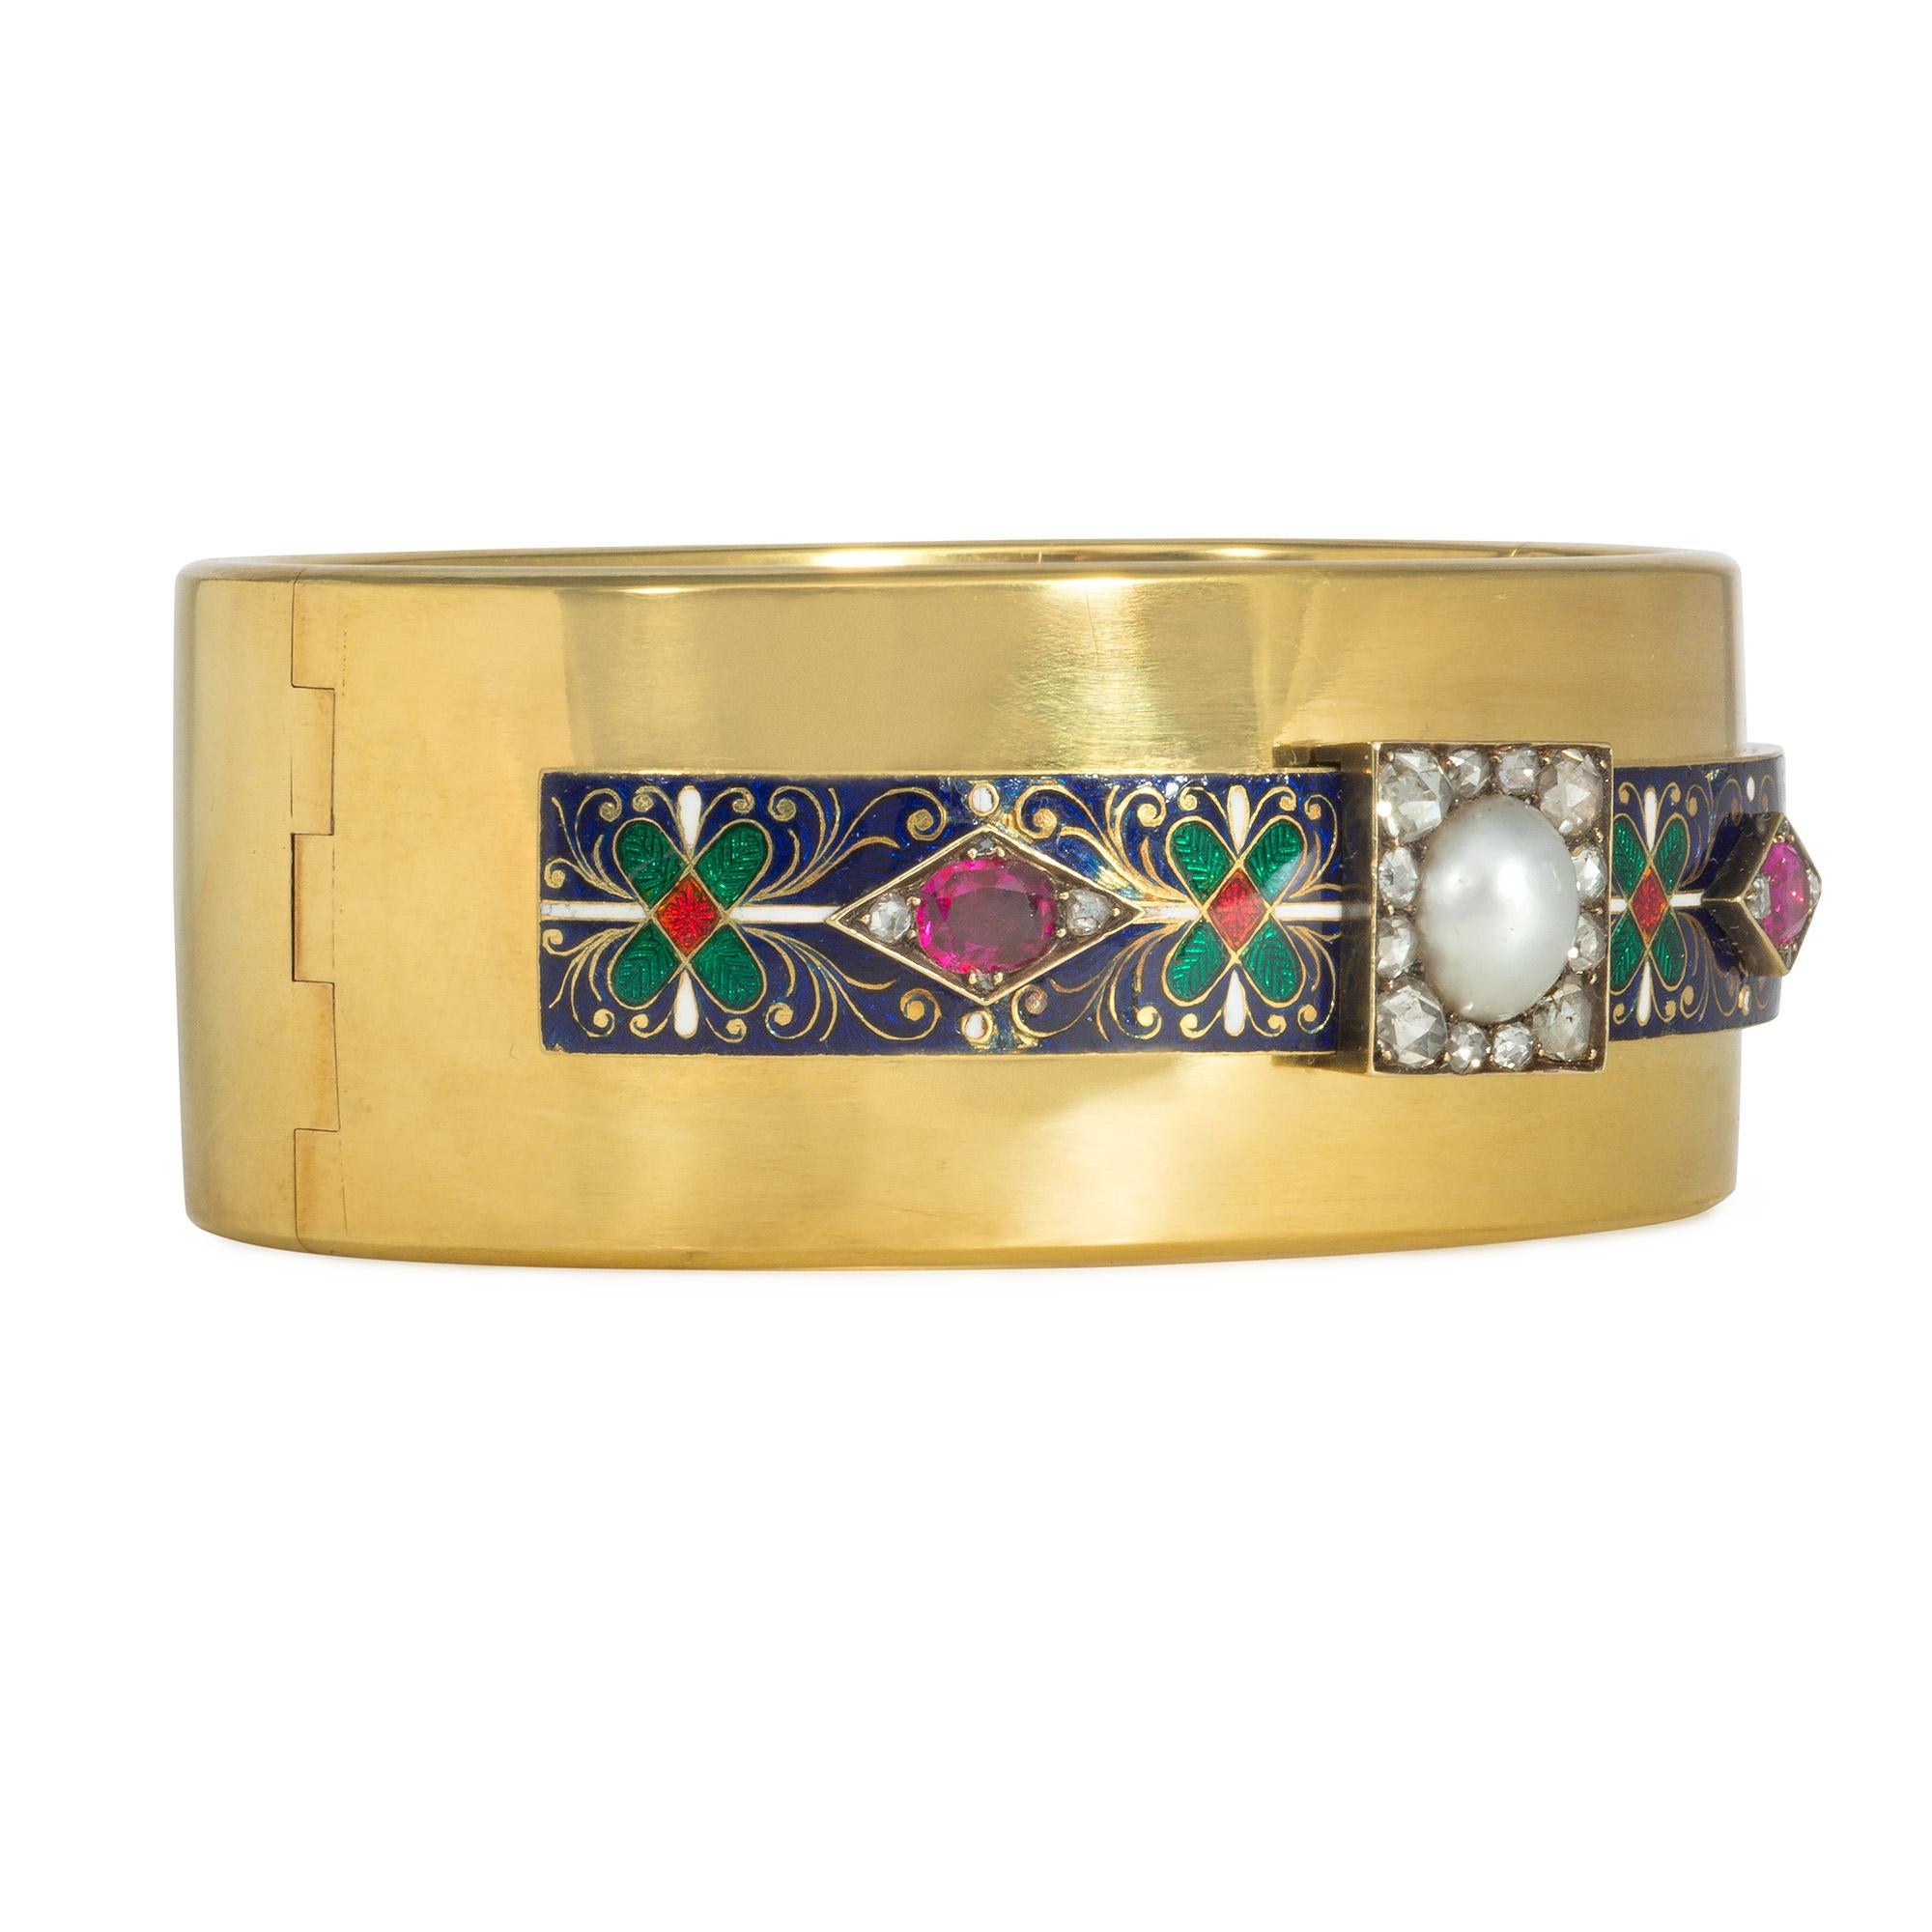 An antique ruby, diamond, pearl, and enamel Holbeinesque cuff bracelet centered by a pearl in a rose-cut diamond surround and flanked by rectangular enameled elements, each centered by rubies and diamonds set in a rhombus, in 15k gold. 